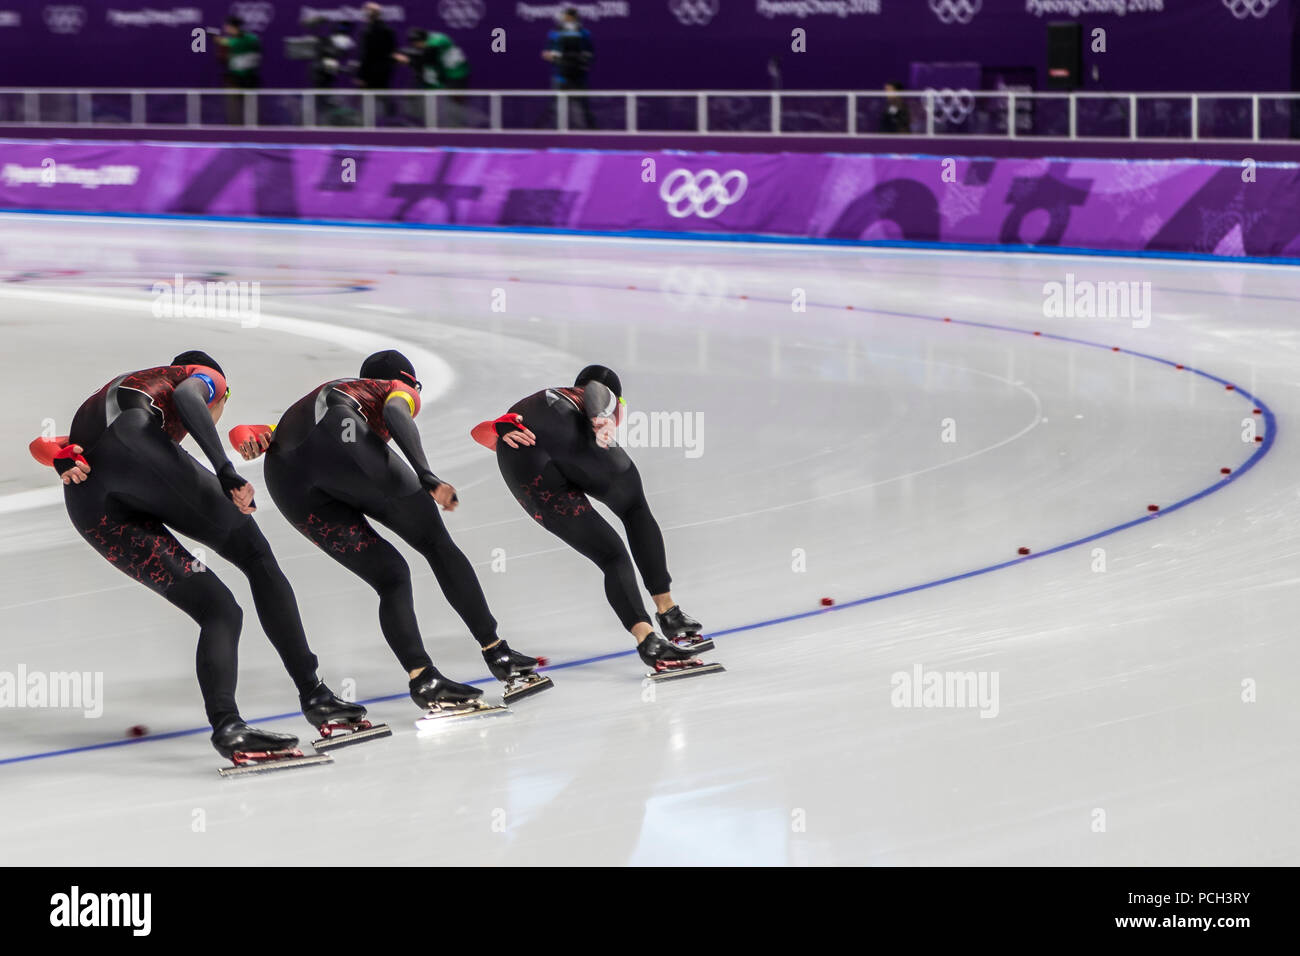 Canadian women compete in the speed skating ladies team pursuit at the Olympic Winter Games PyeongChang 2018 Stock Photo